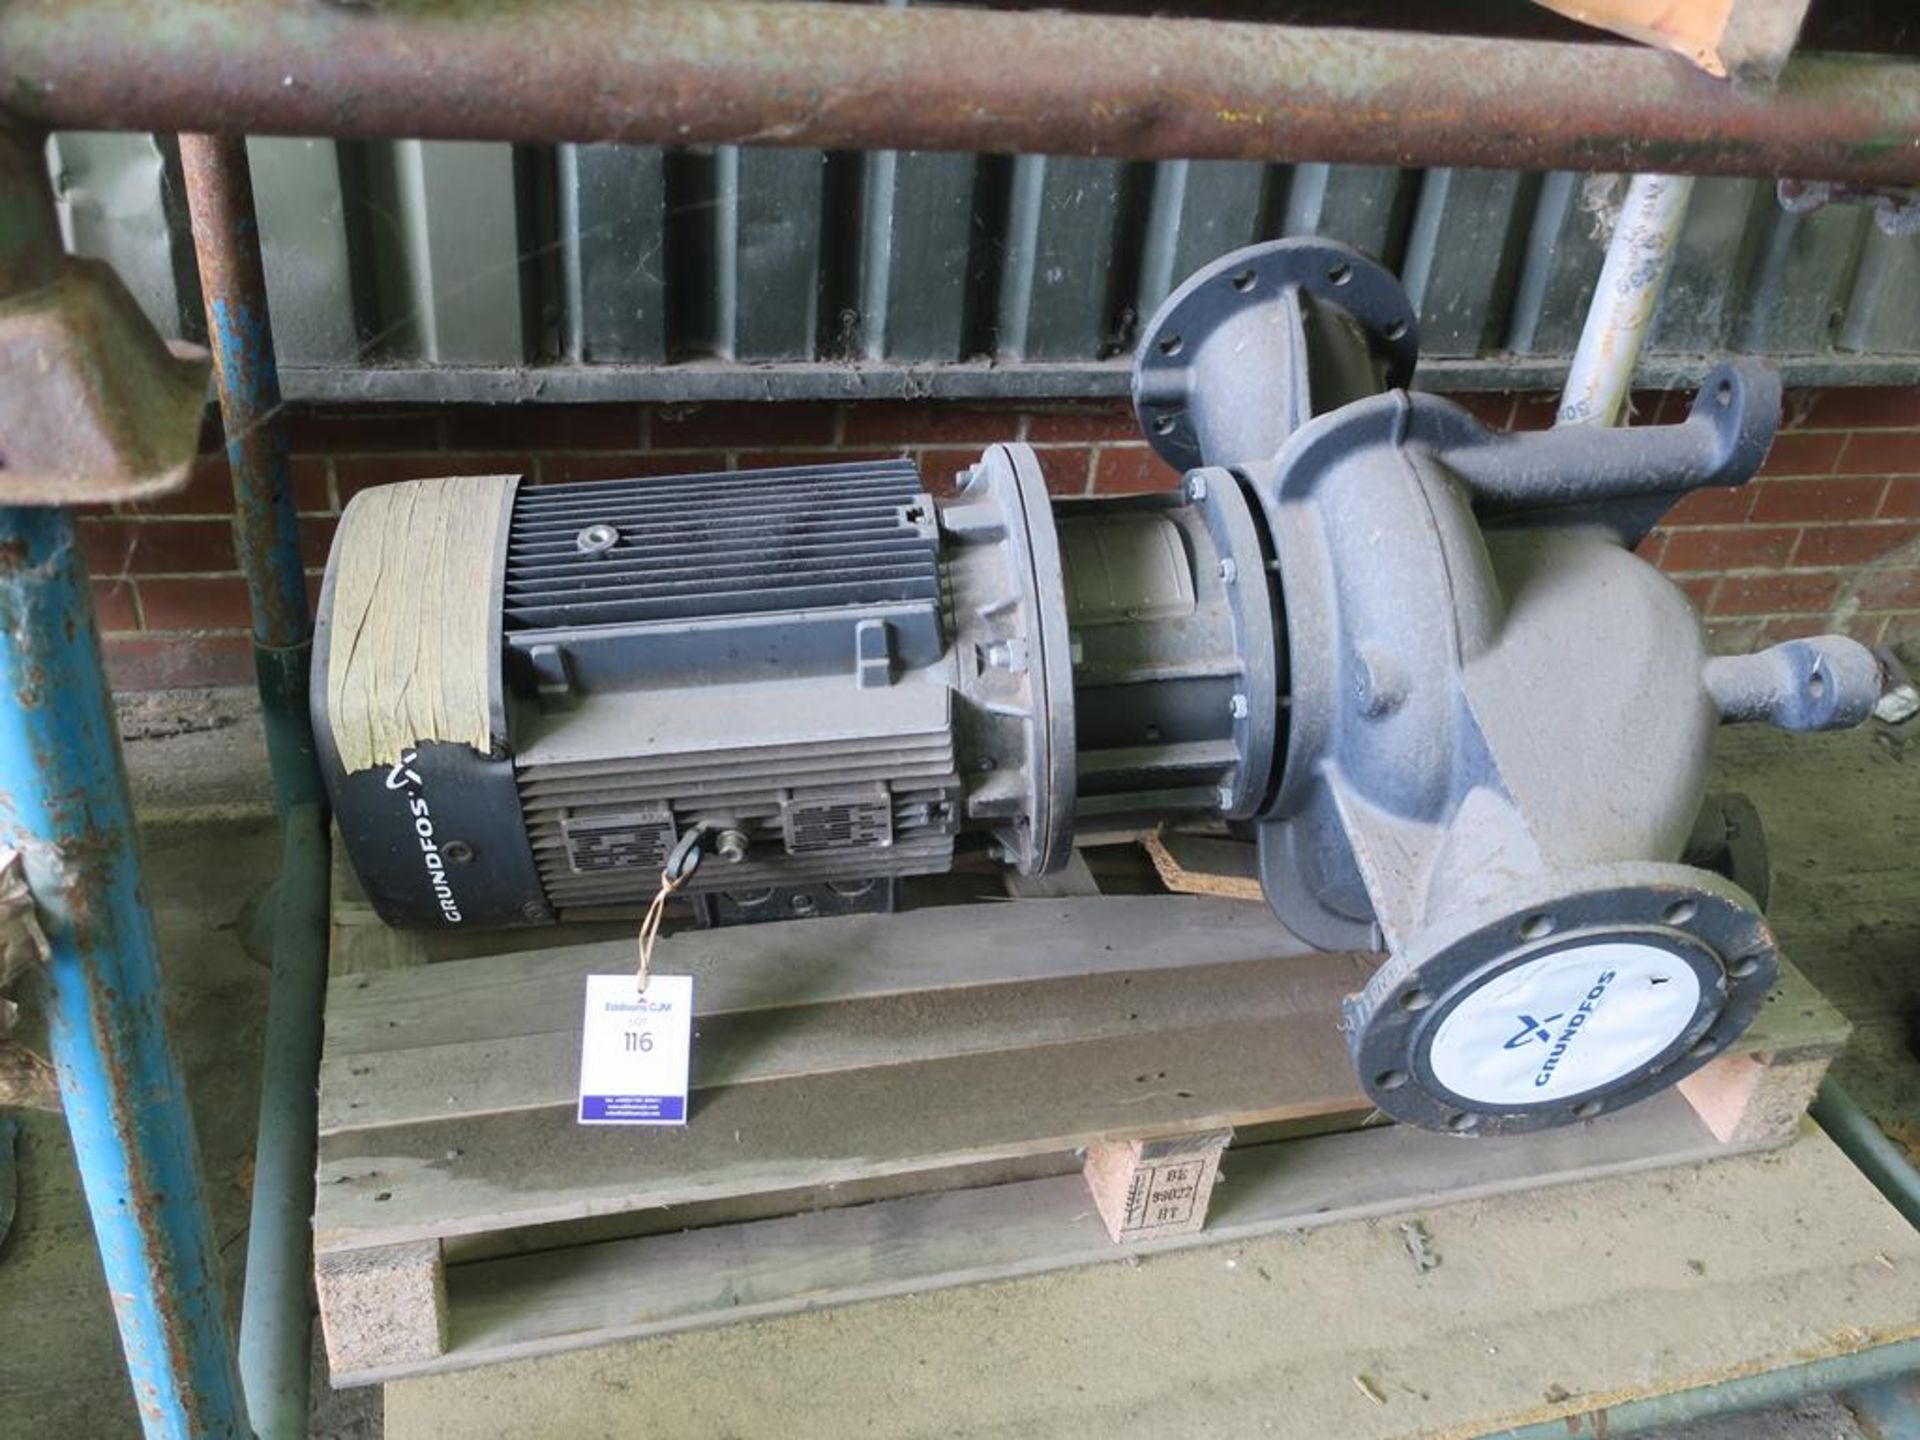 * A Grundfos Motor s/n 5967 11.0kW together with a Pump Unit. Please note there is a £5 plus VAT